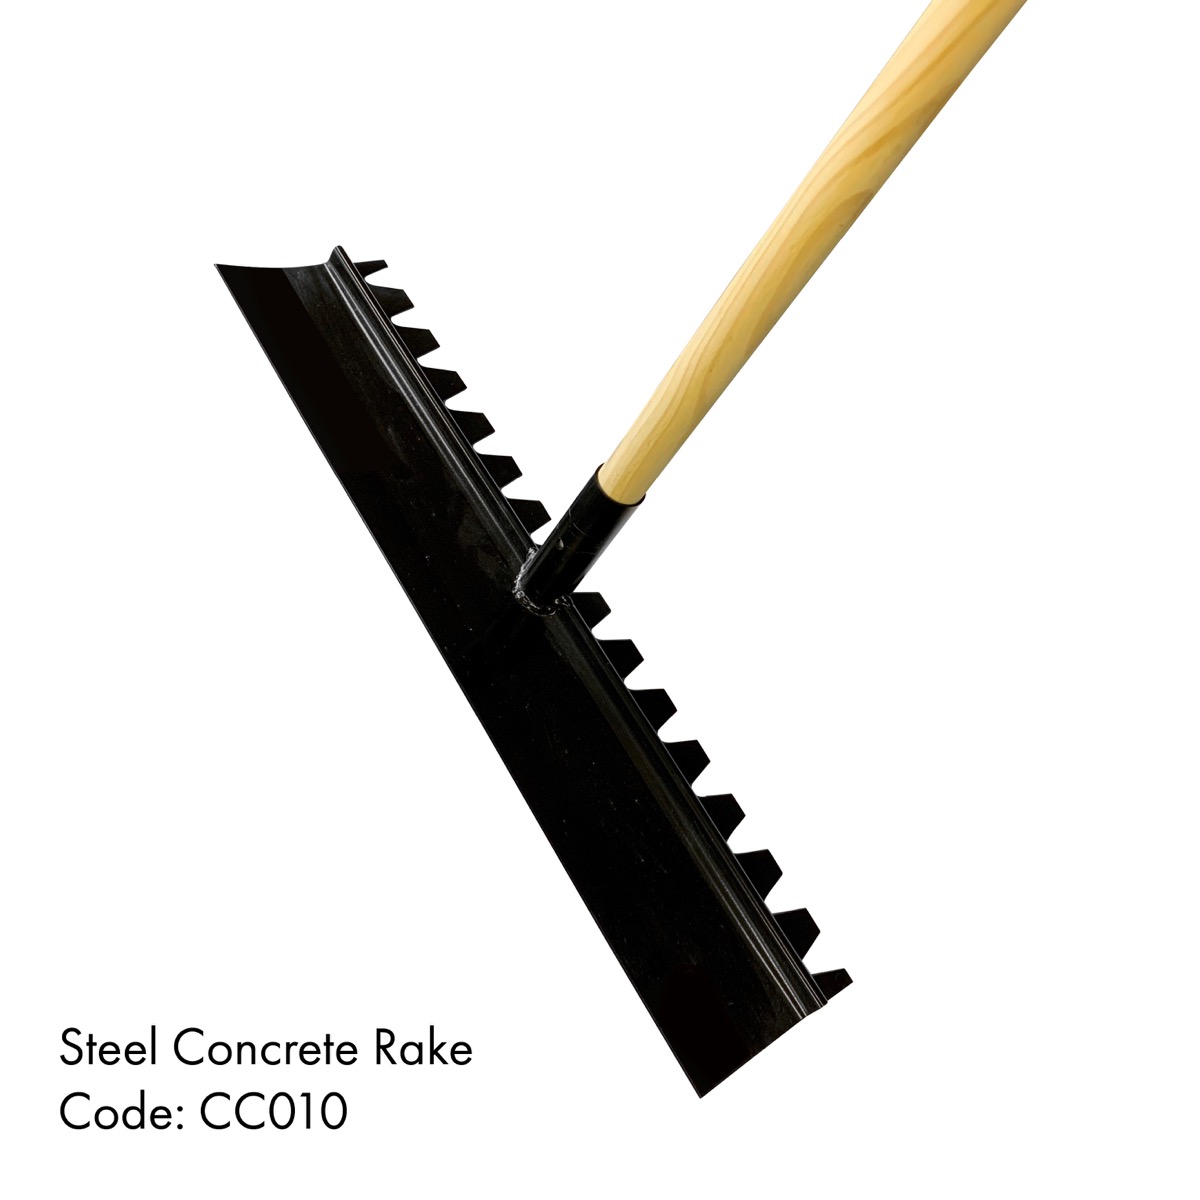 Steel Dual Faced Concrete Rakes. Speedcrete sell tools and machinery for the concrete industry and construction. These concrete placers are one of the most commonly used tools for placing concrete.